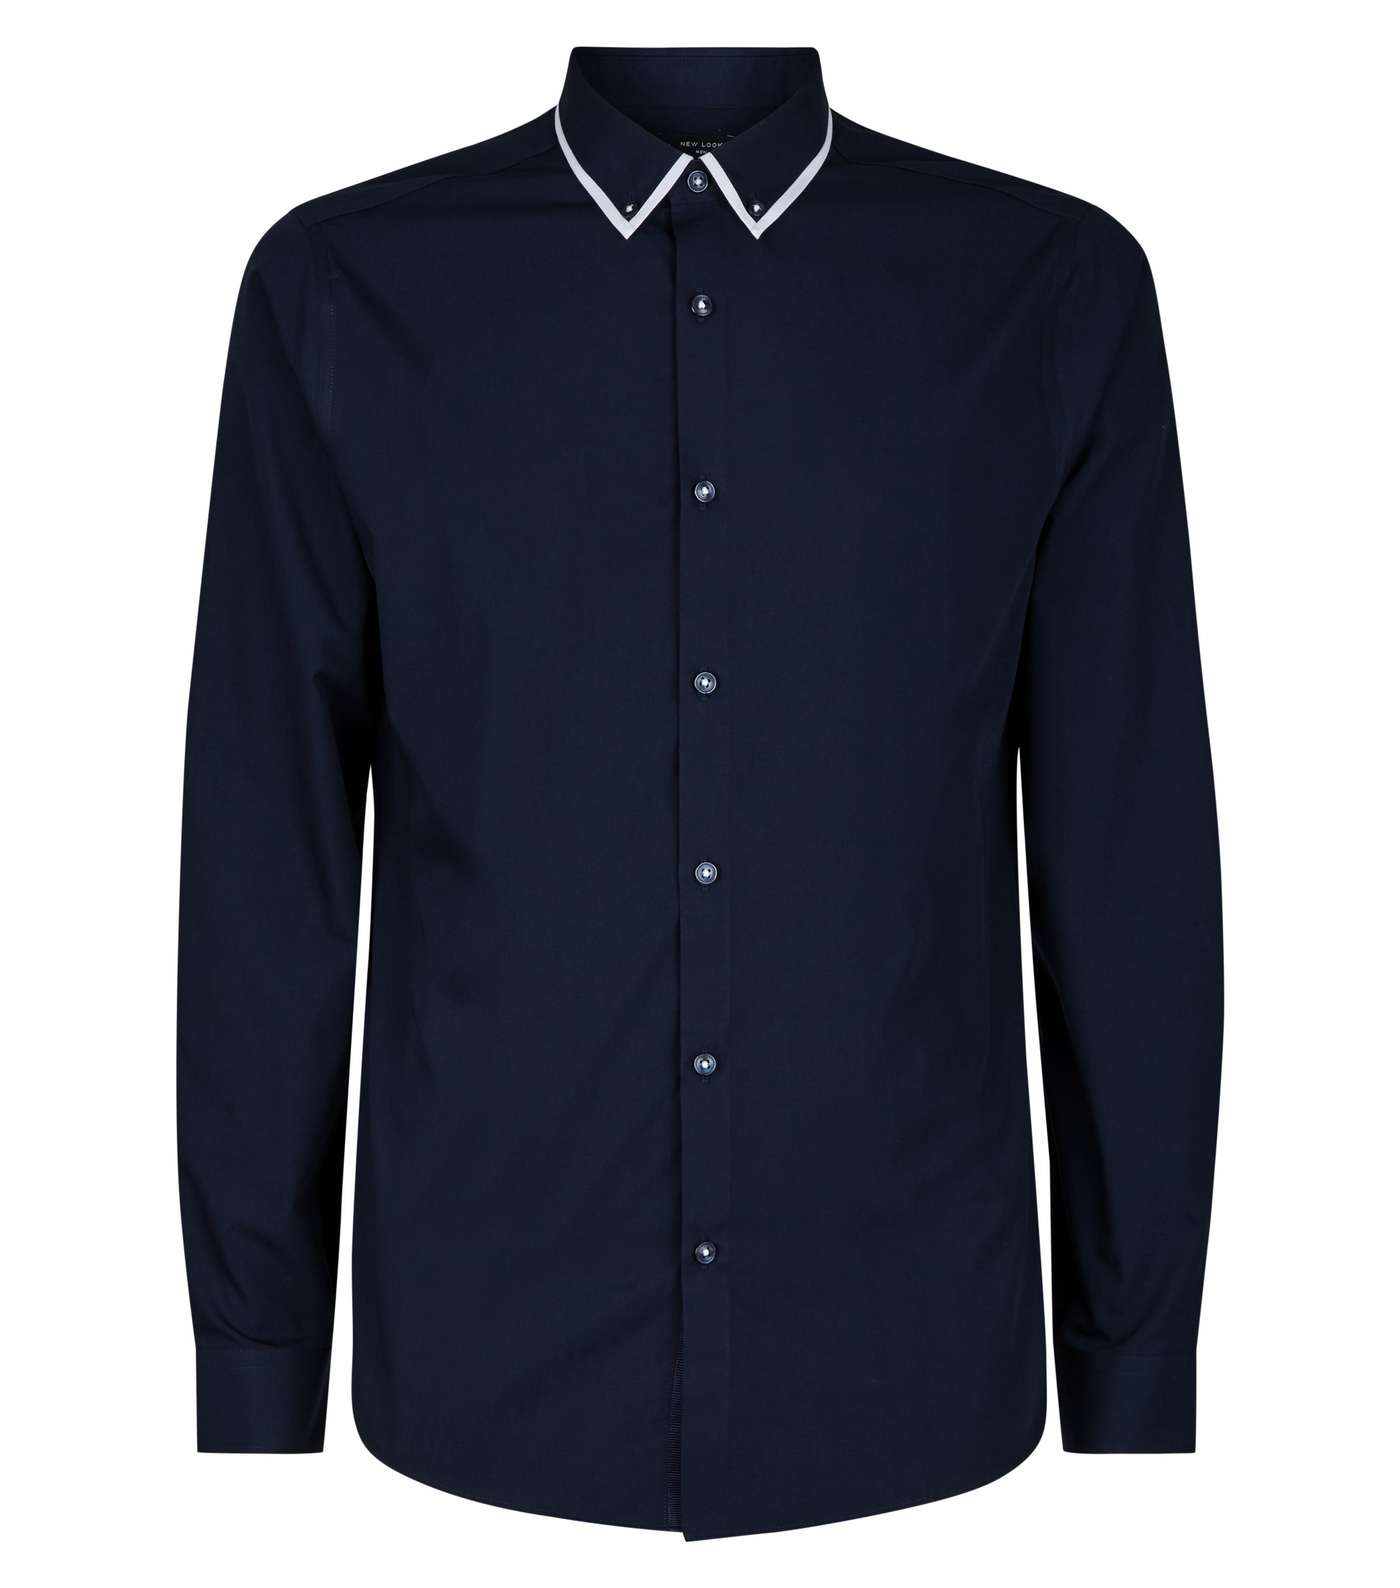 Navy Tipped White Collared Shirt Image 4